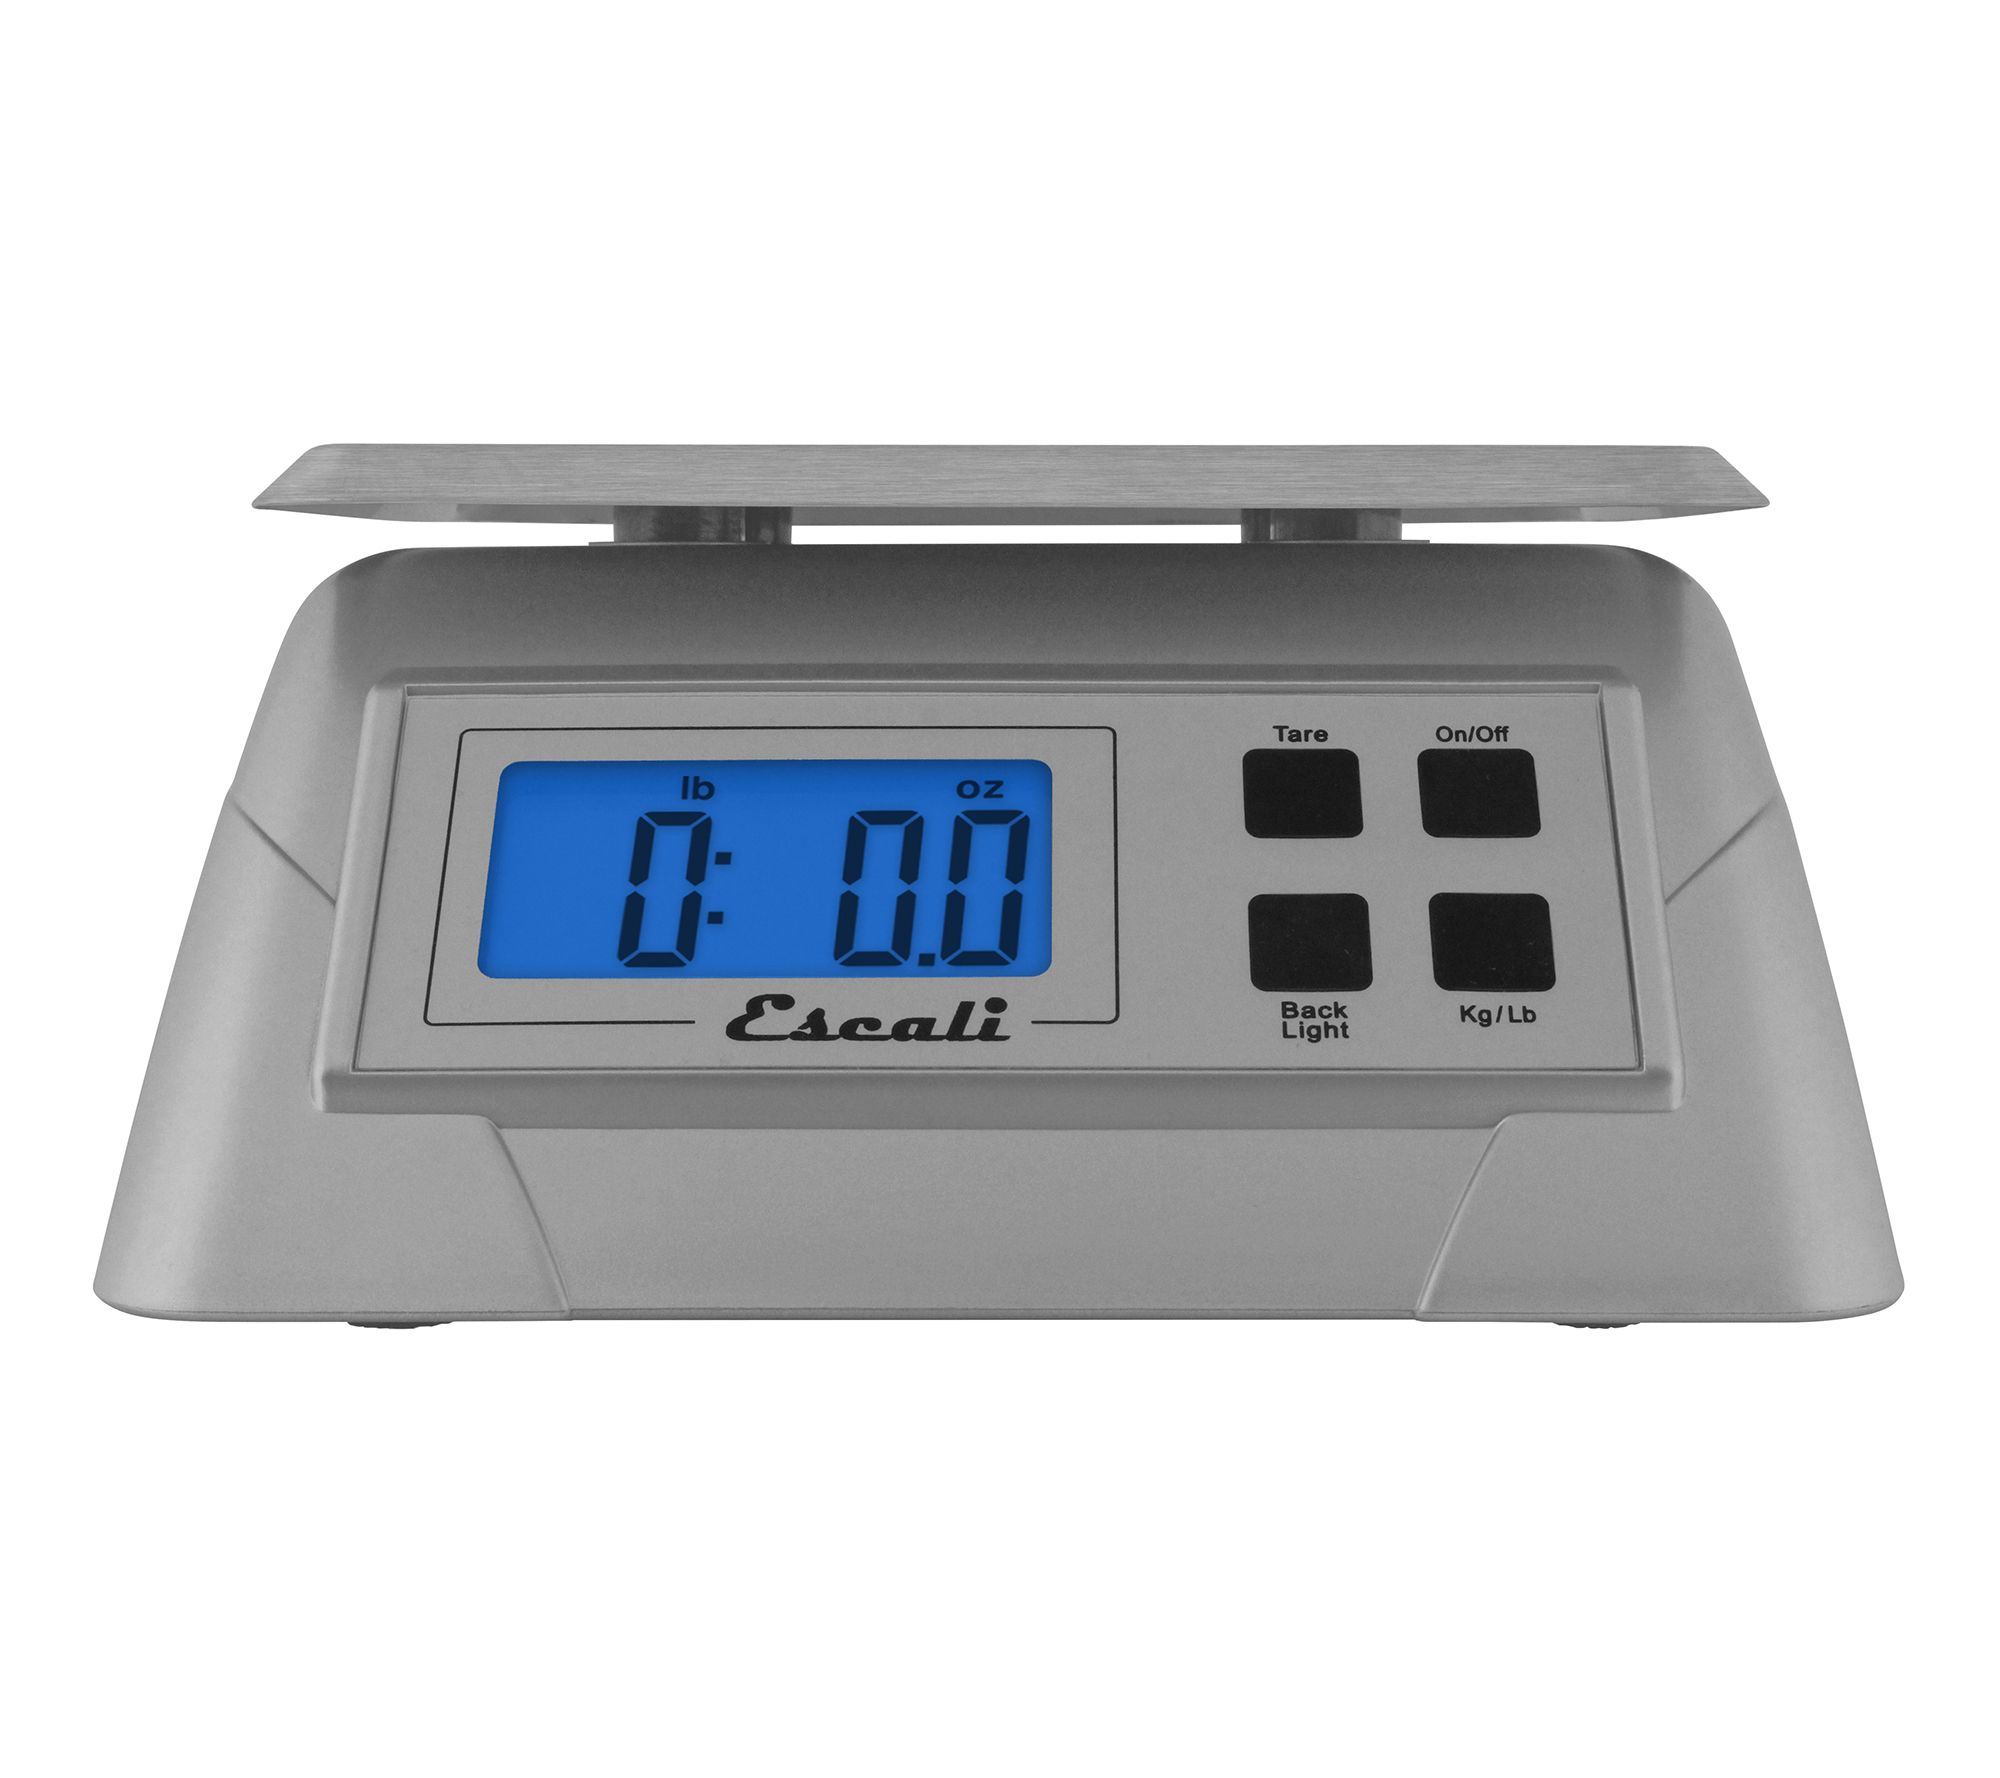 Escali Scale Mercado Series with Dial and Stainless Steel Bowl 11 Lb.  Capacity